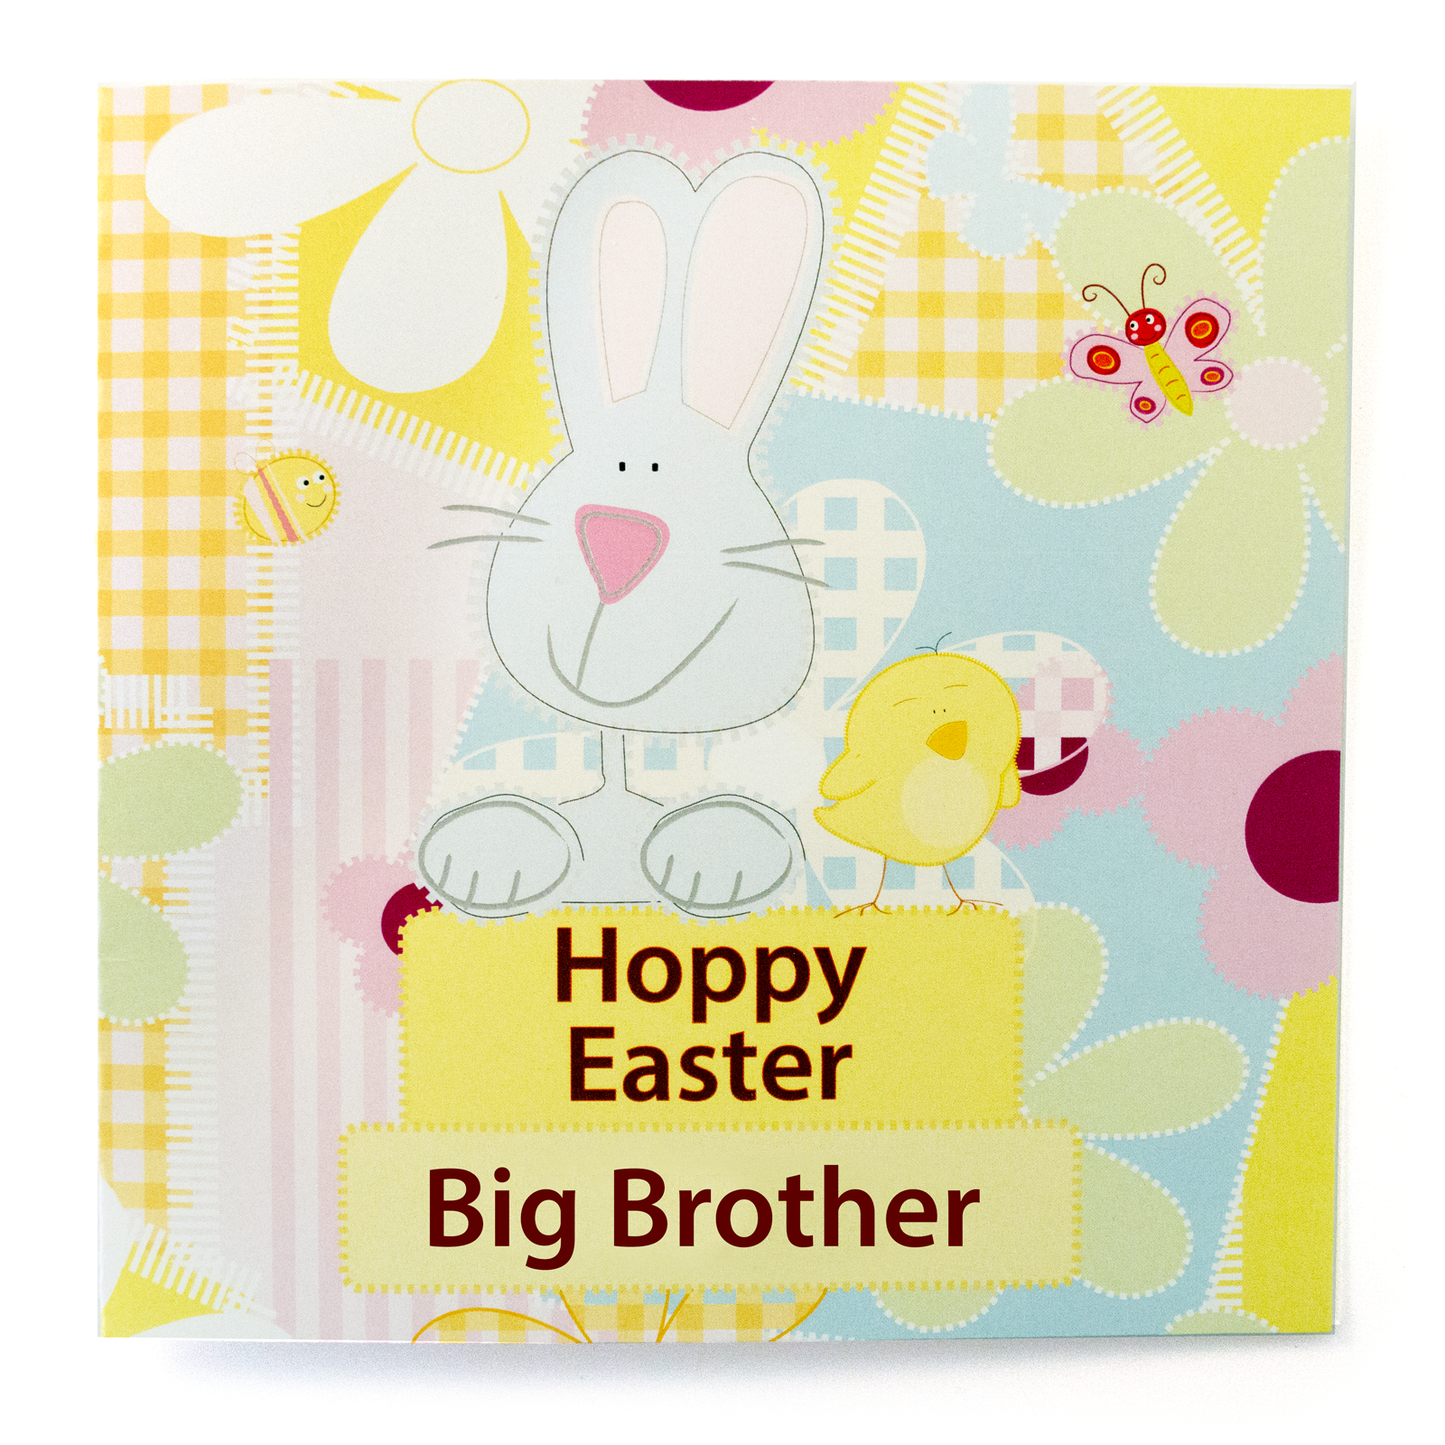 Hoppy Easter Big Brother Card